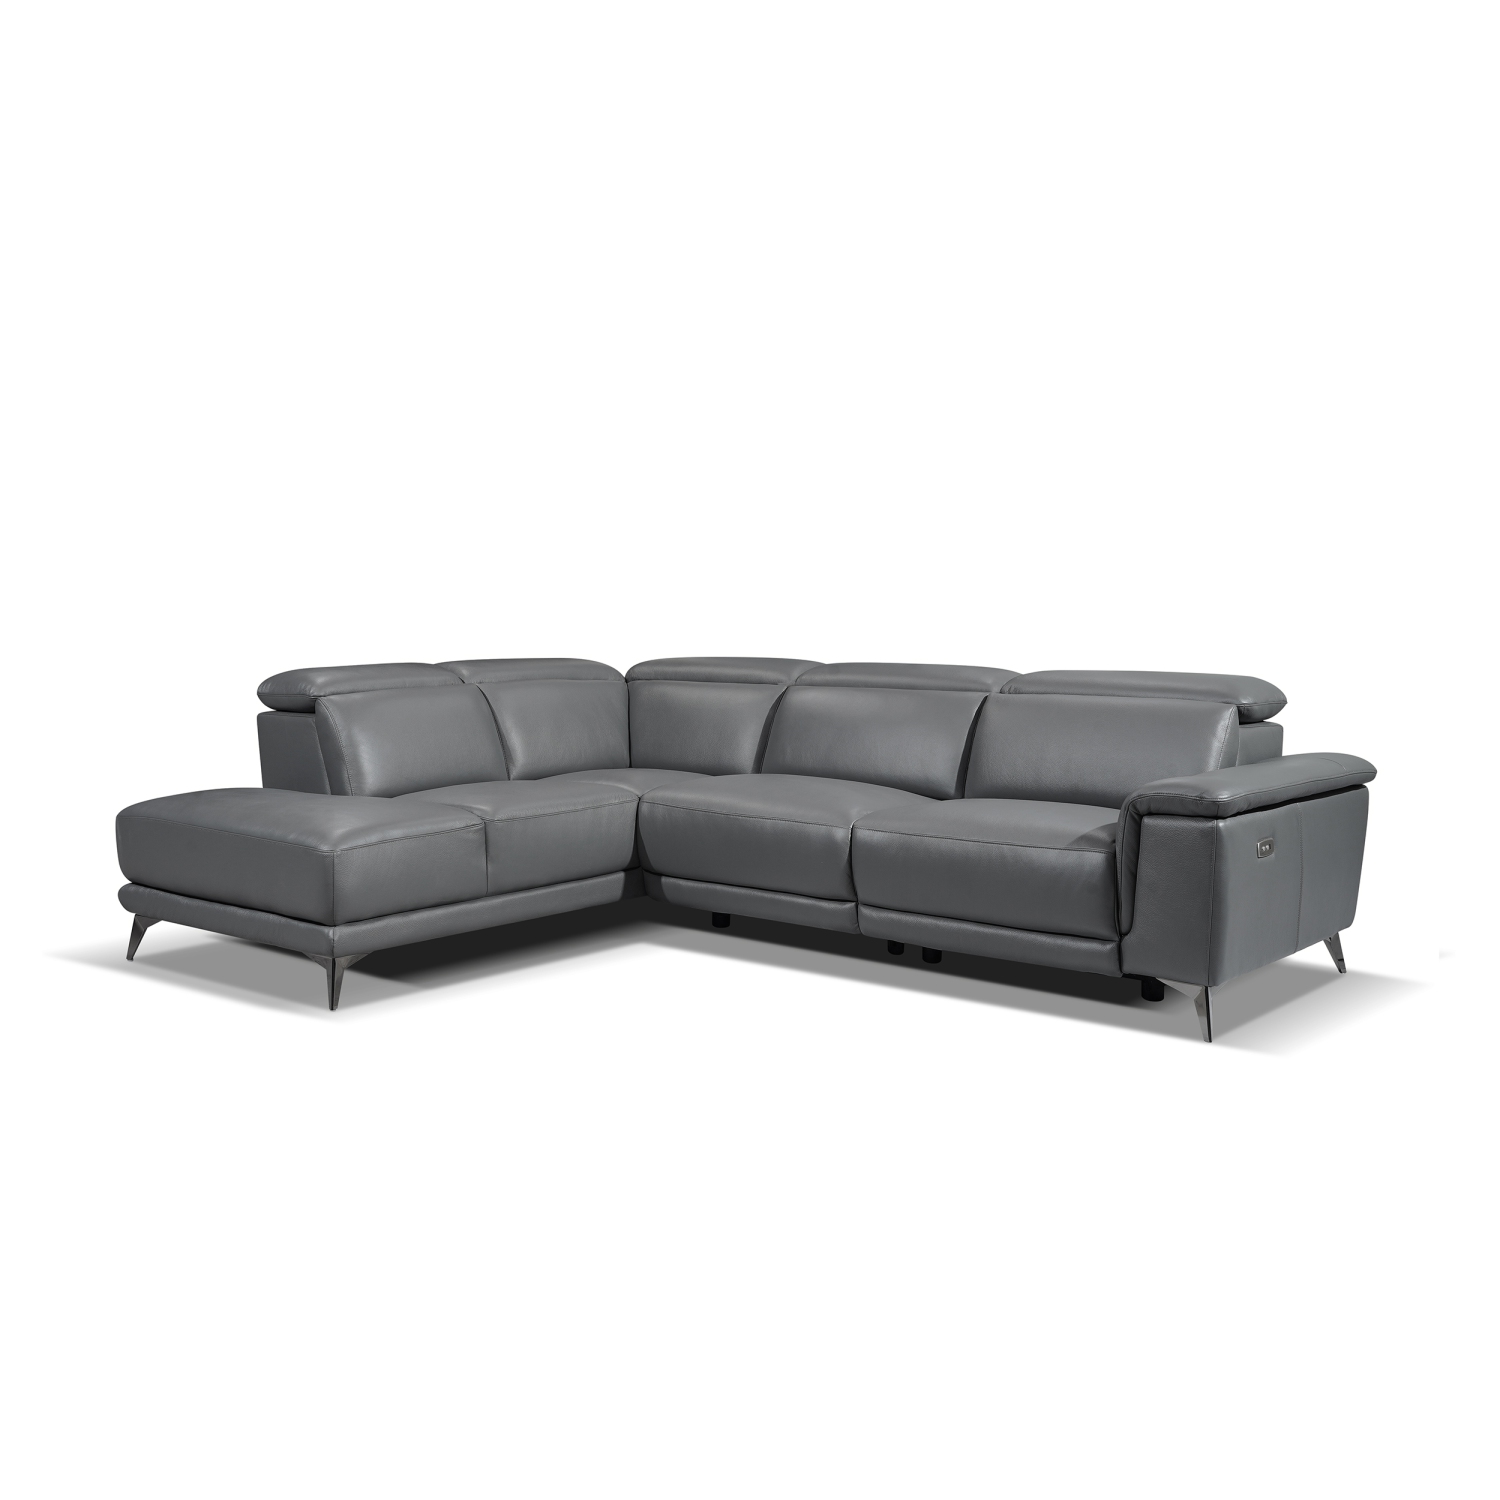 Pista Contemporary Grey Top Grain Leather Power Reclining Sectional